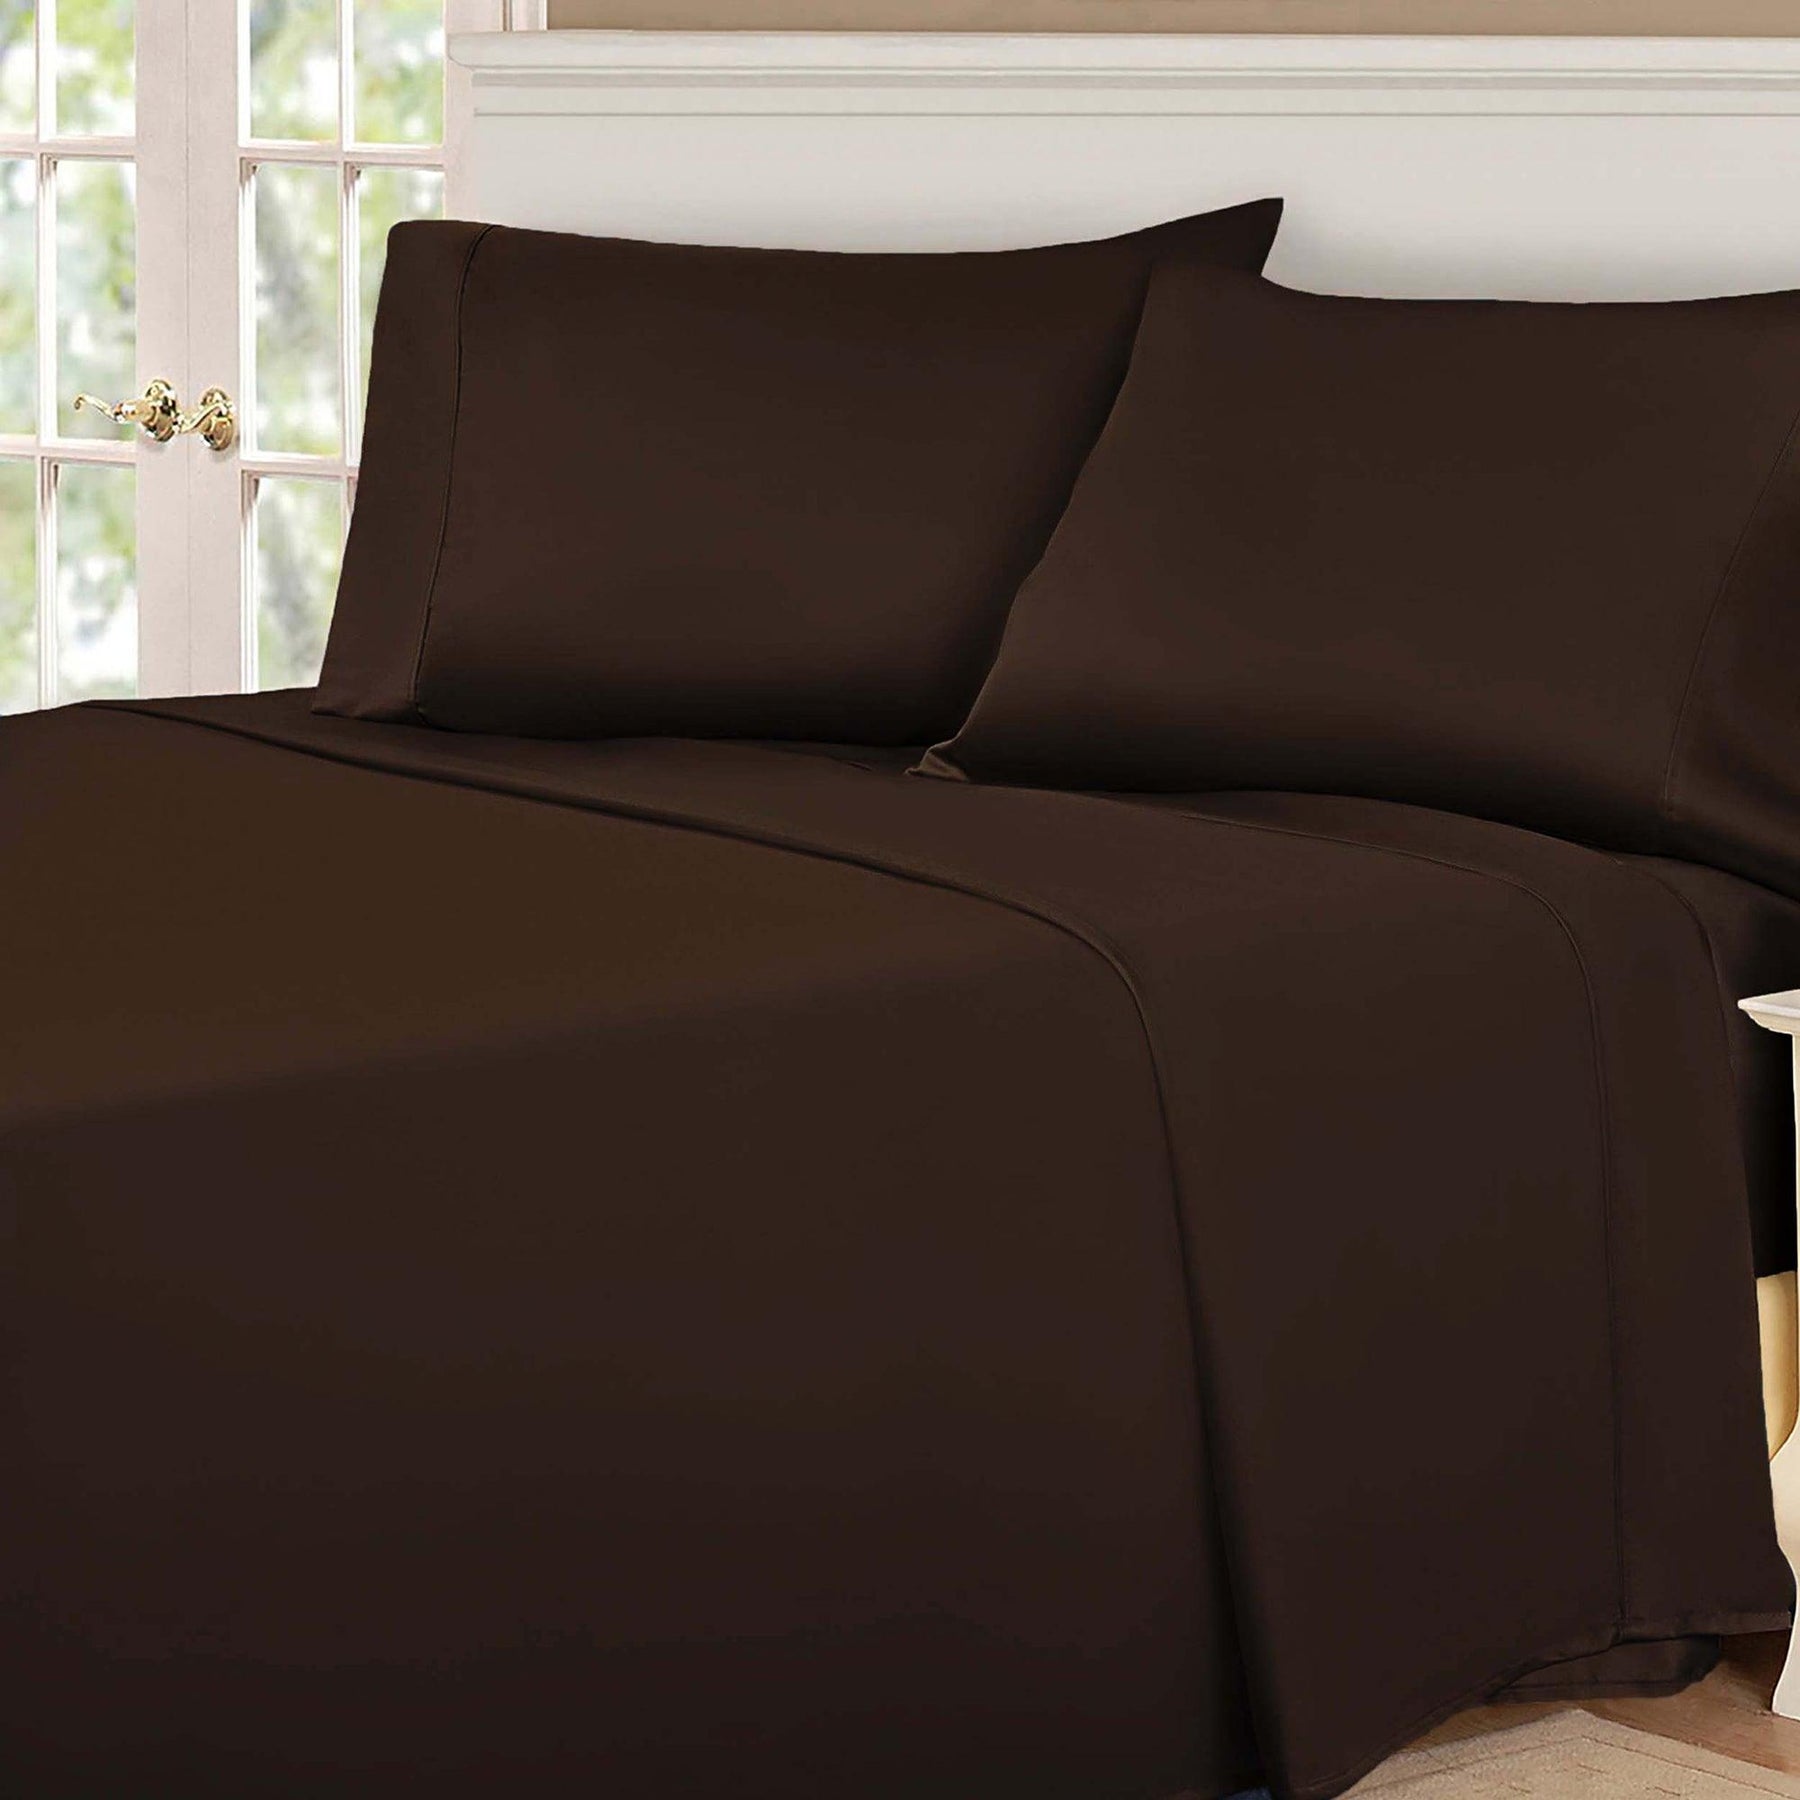  Superior Egyptian Cotton 530 Thread Count Solid Sheet Set  - Chocolate